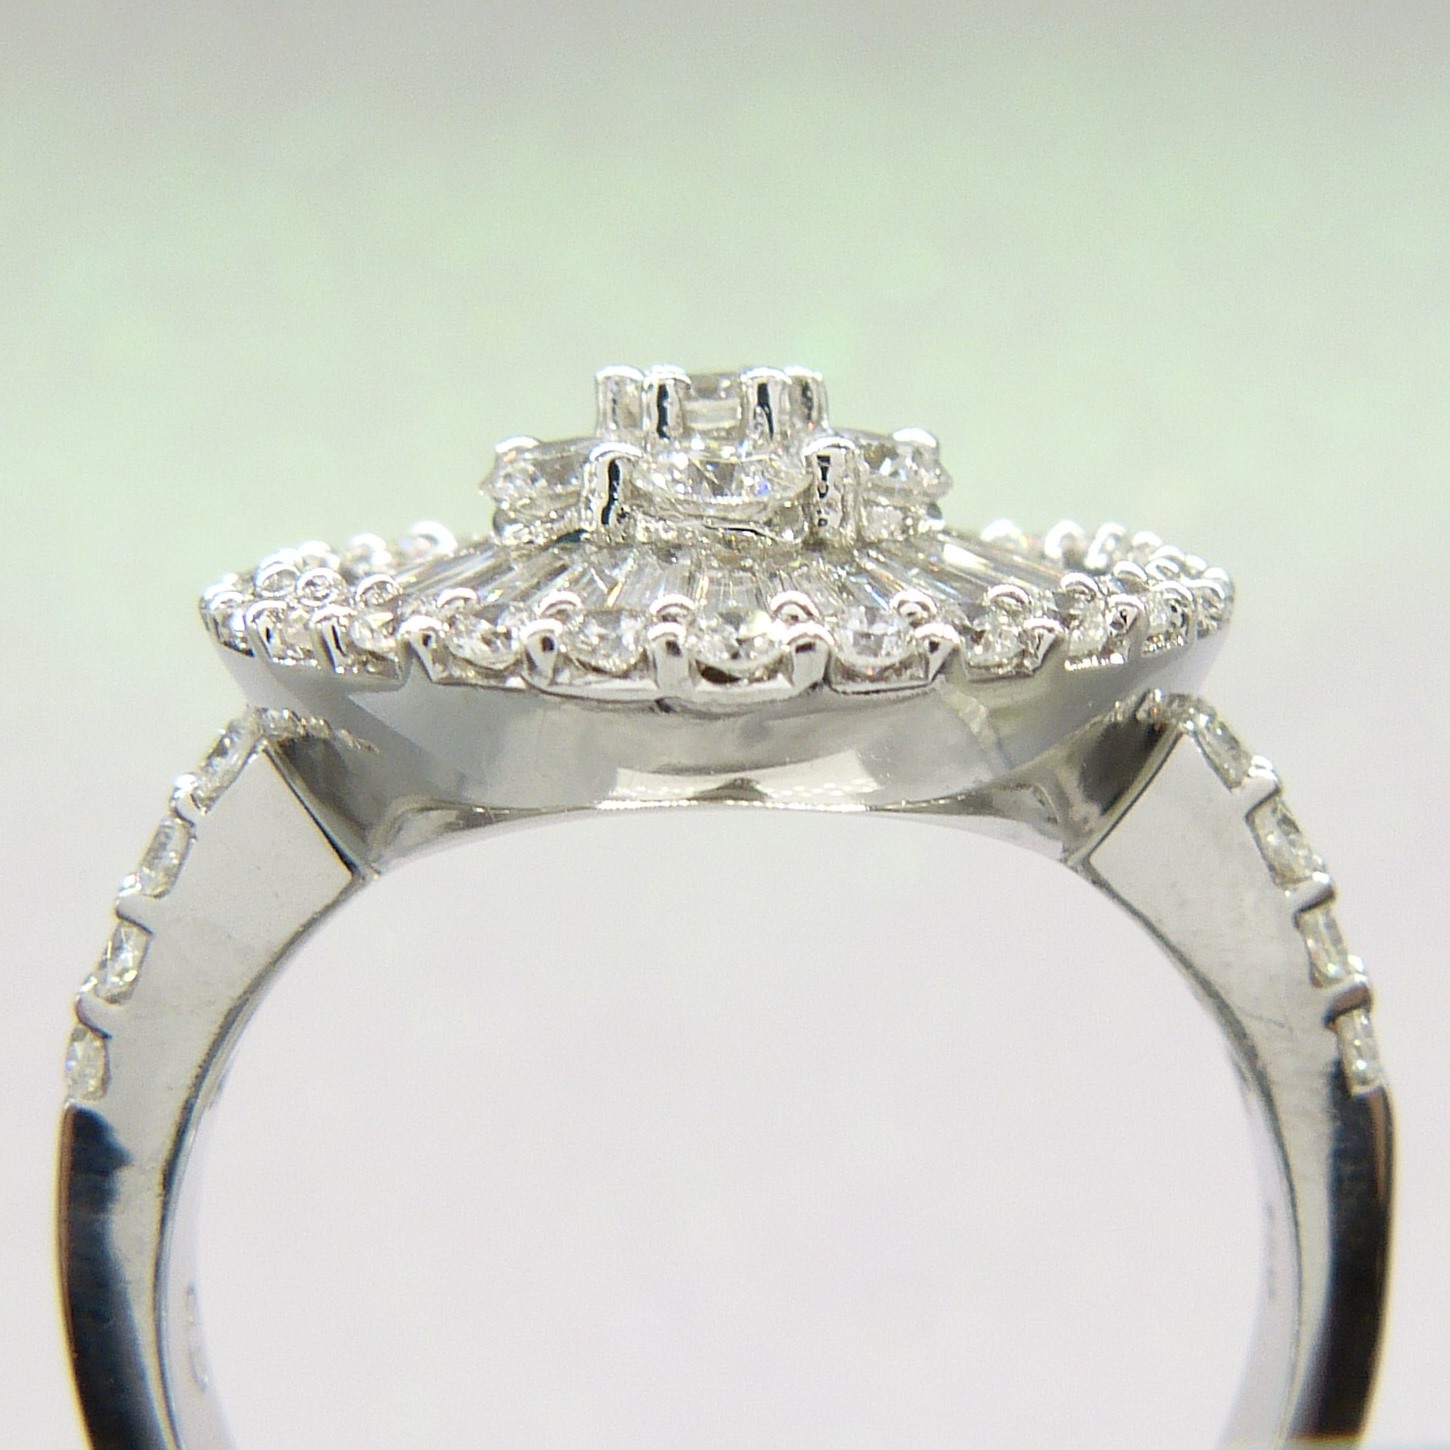 An attractive, certificated, 2.05 carat Diamond cluster ring in 18k white Gold, with Diamond - Image 8 of 10